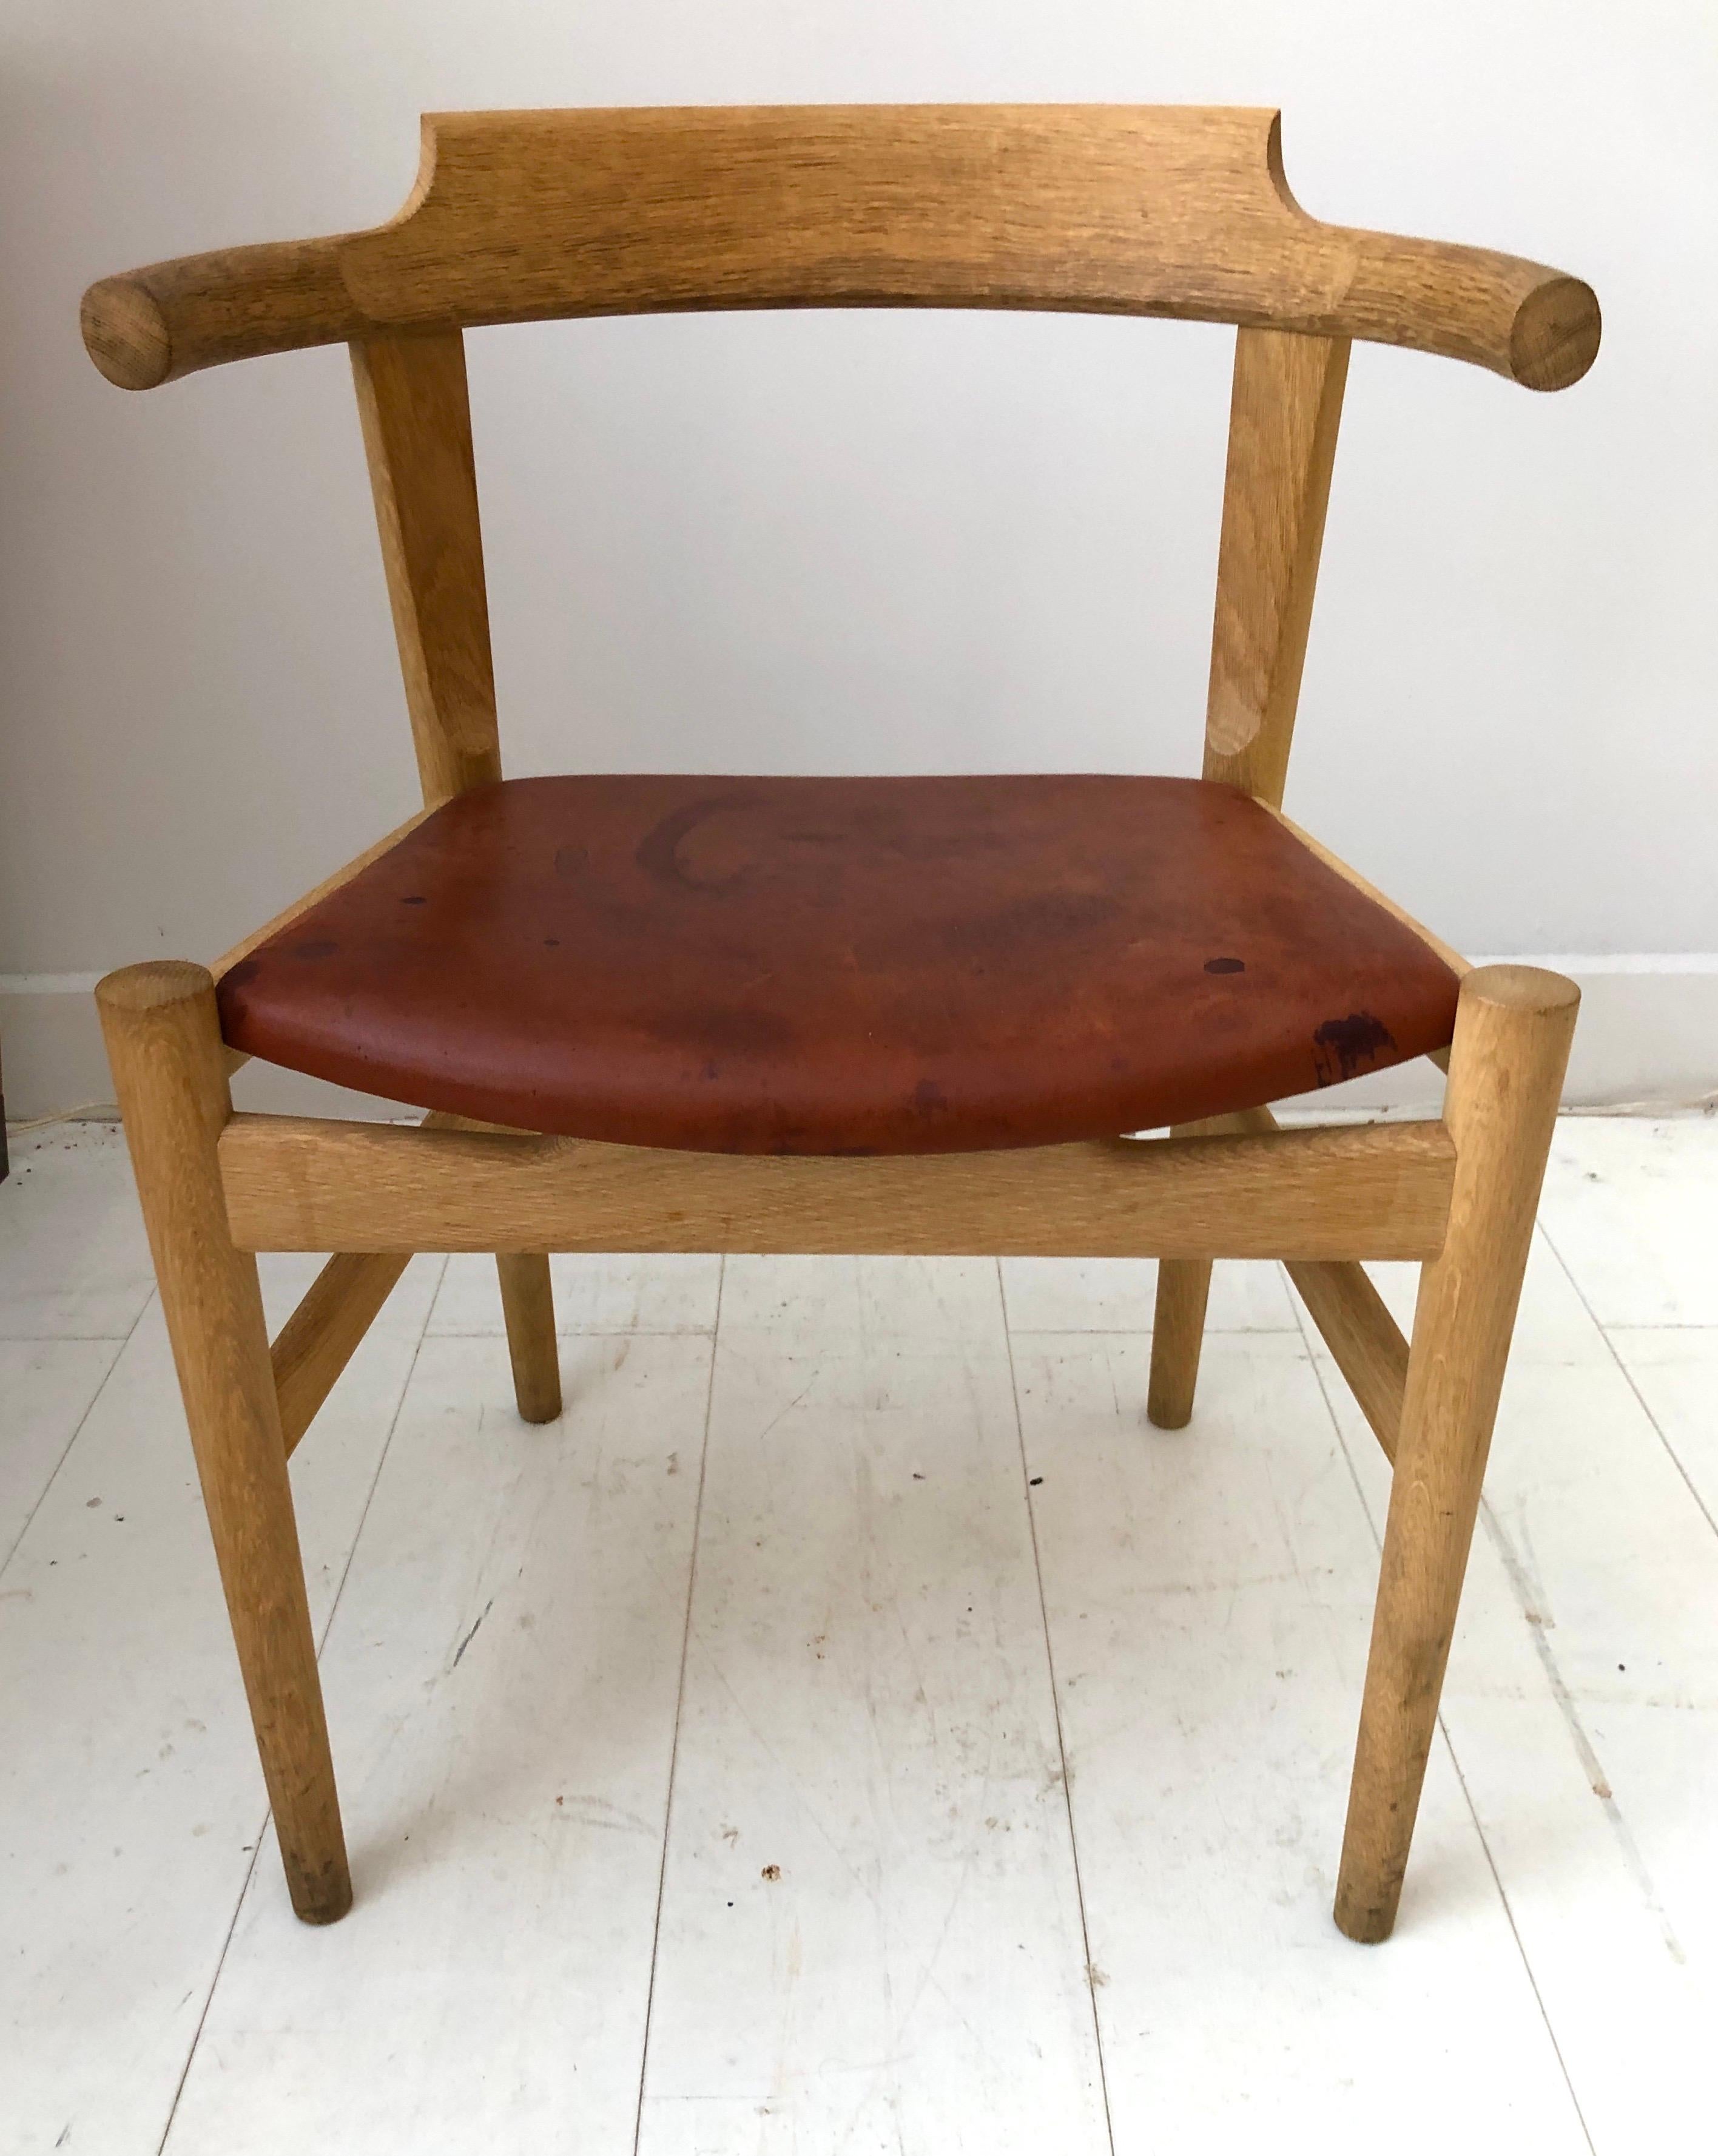  PP68 elbow chair, designed by Hans J. Wegner for PP Møbler, Denmark 1987. Sculpturally carved oak with original cognac  saddle leather seat. Maker’s stamp on underside . In very good vintage condition. The PP68 chair was Wegner's’ final dining